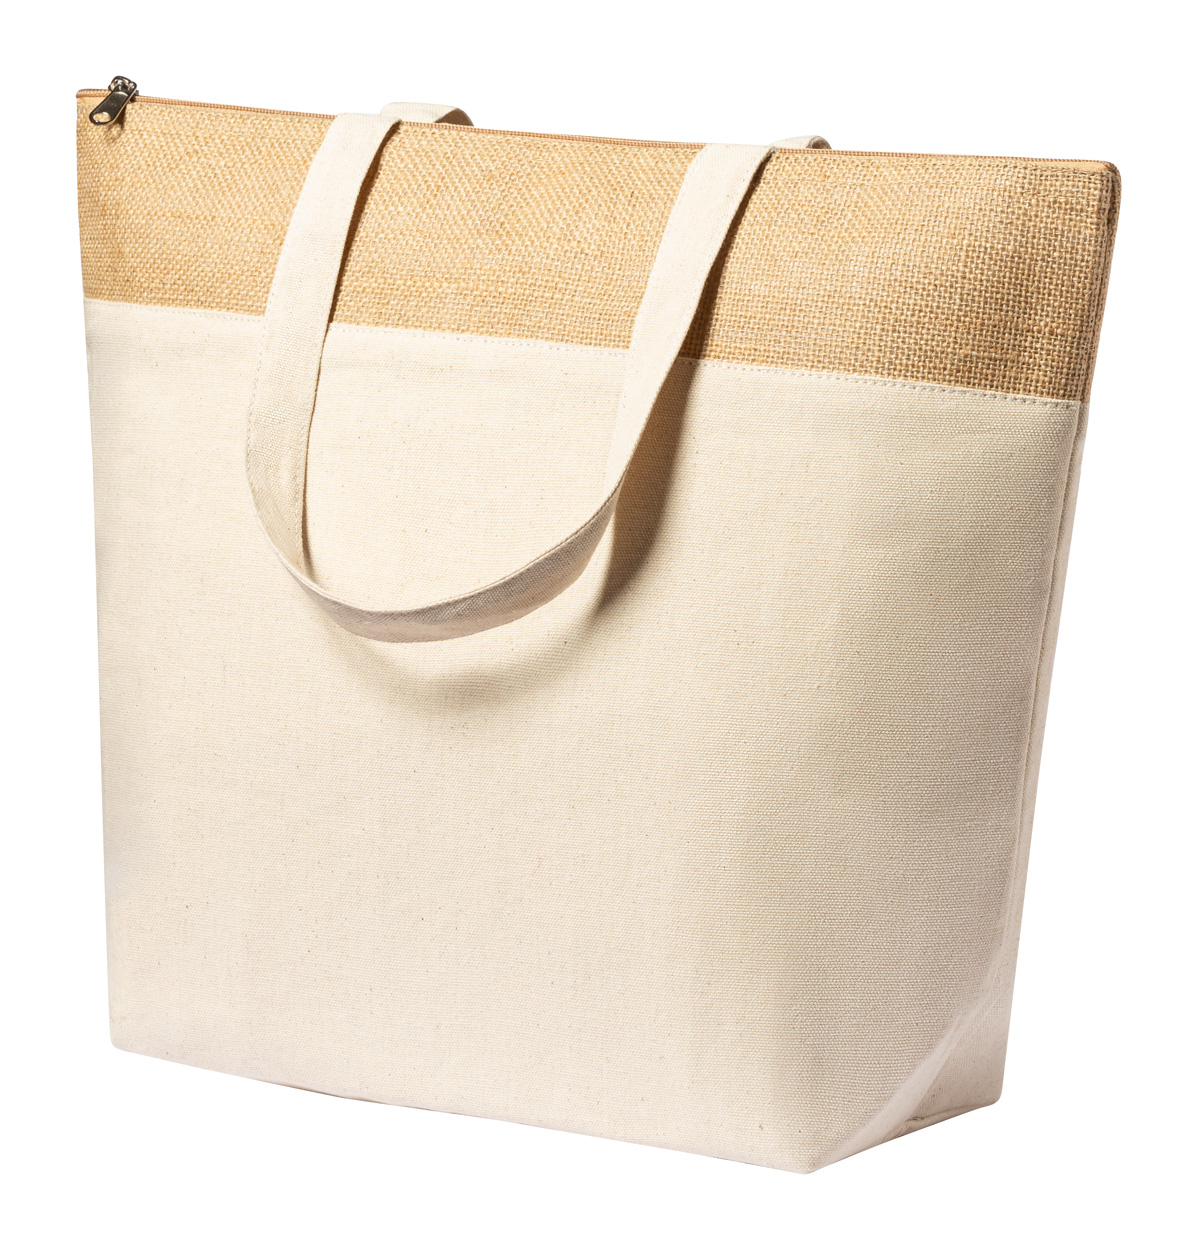 Cooling shopping bag LINAX made of cotton and jute - natural